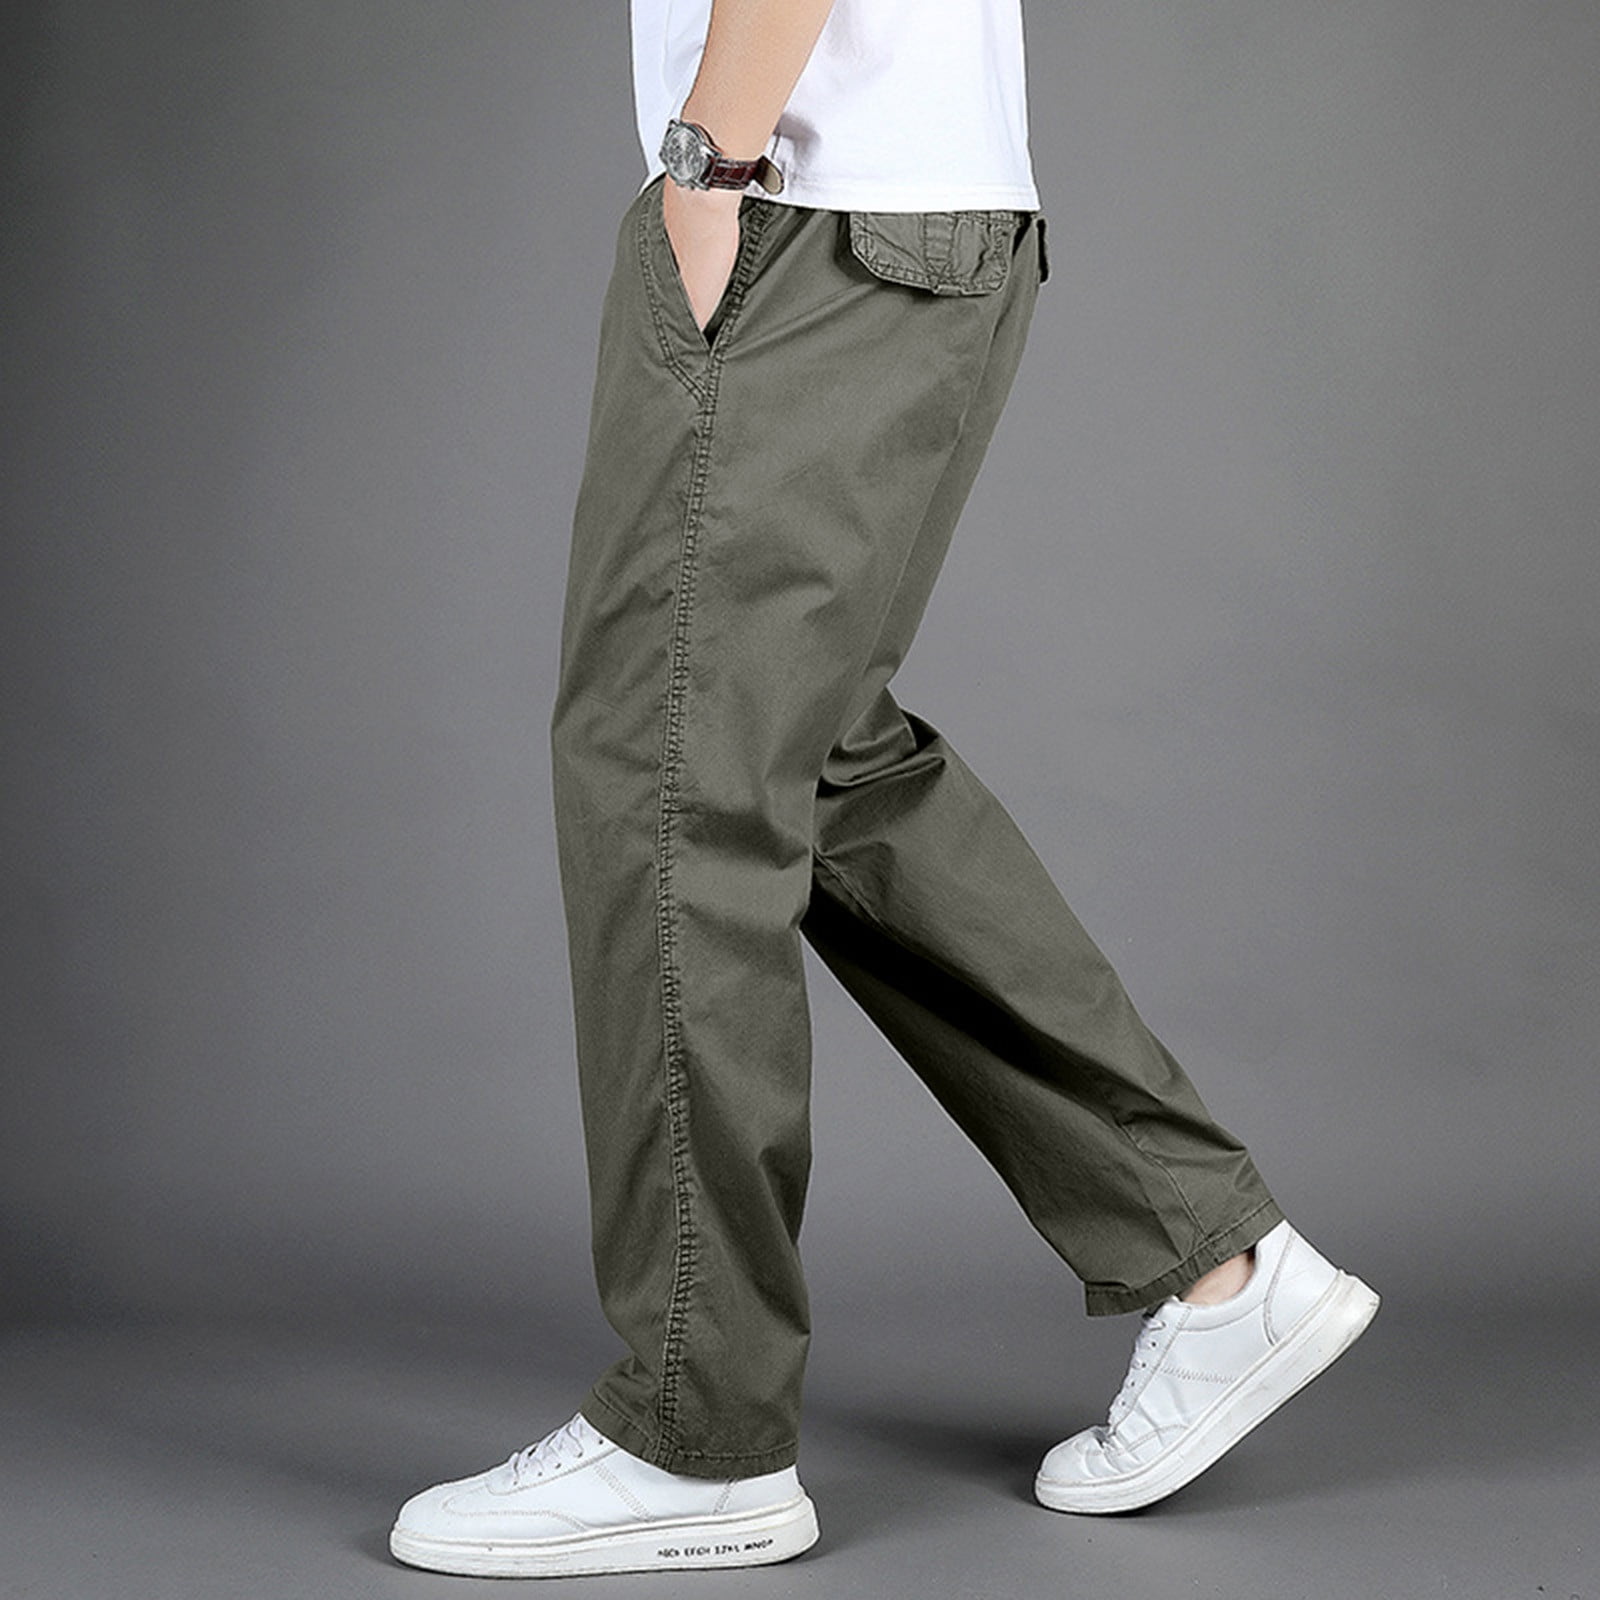 Mens Fashion Casual Loose Cotton Plus Size Pocket Lace Up Elastic Waist Pants  Trousers 42x29 Mens Pants Nonslip Band Big And Tall Pants Warm And Tote  Stretch Chinos Men Little Pants Mens